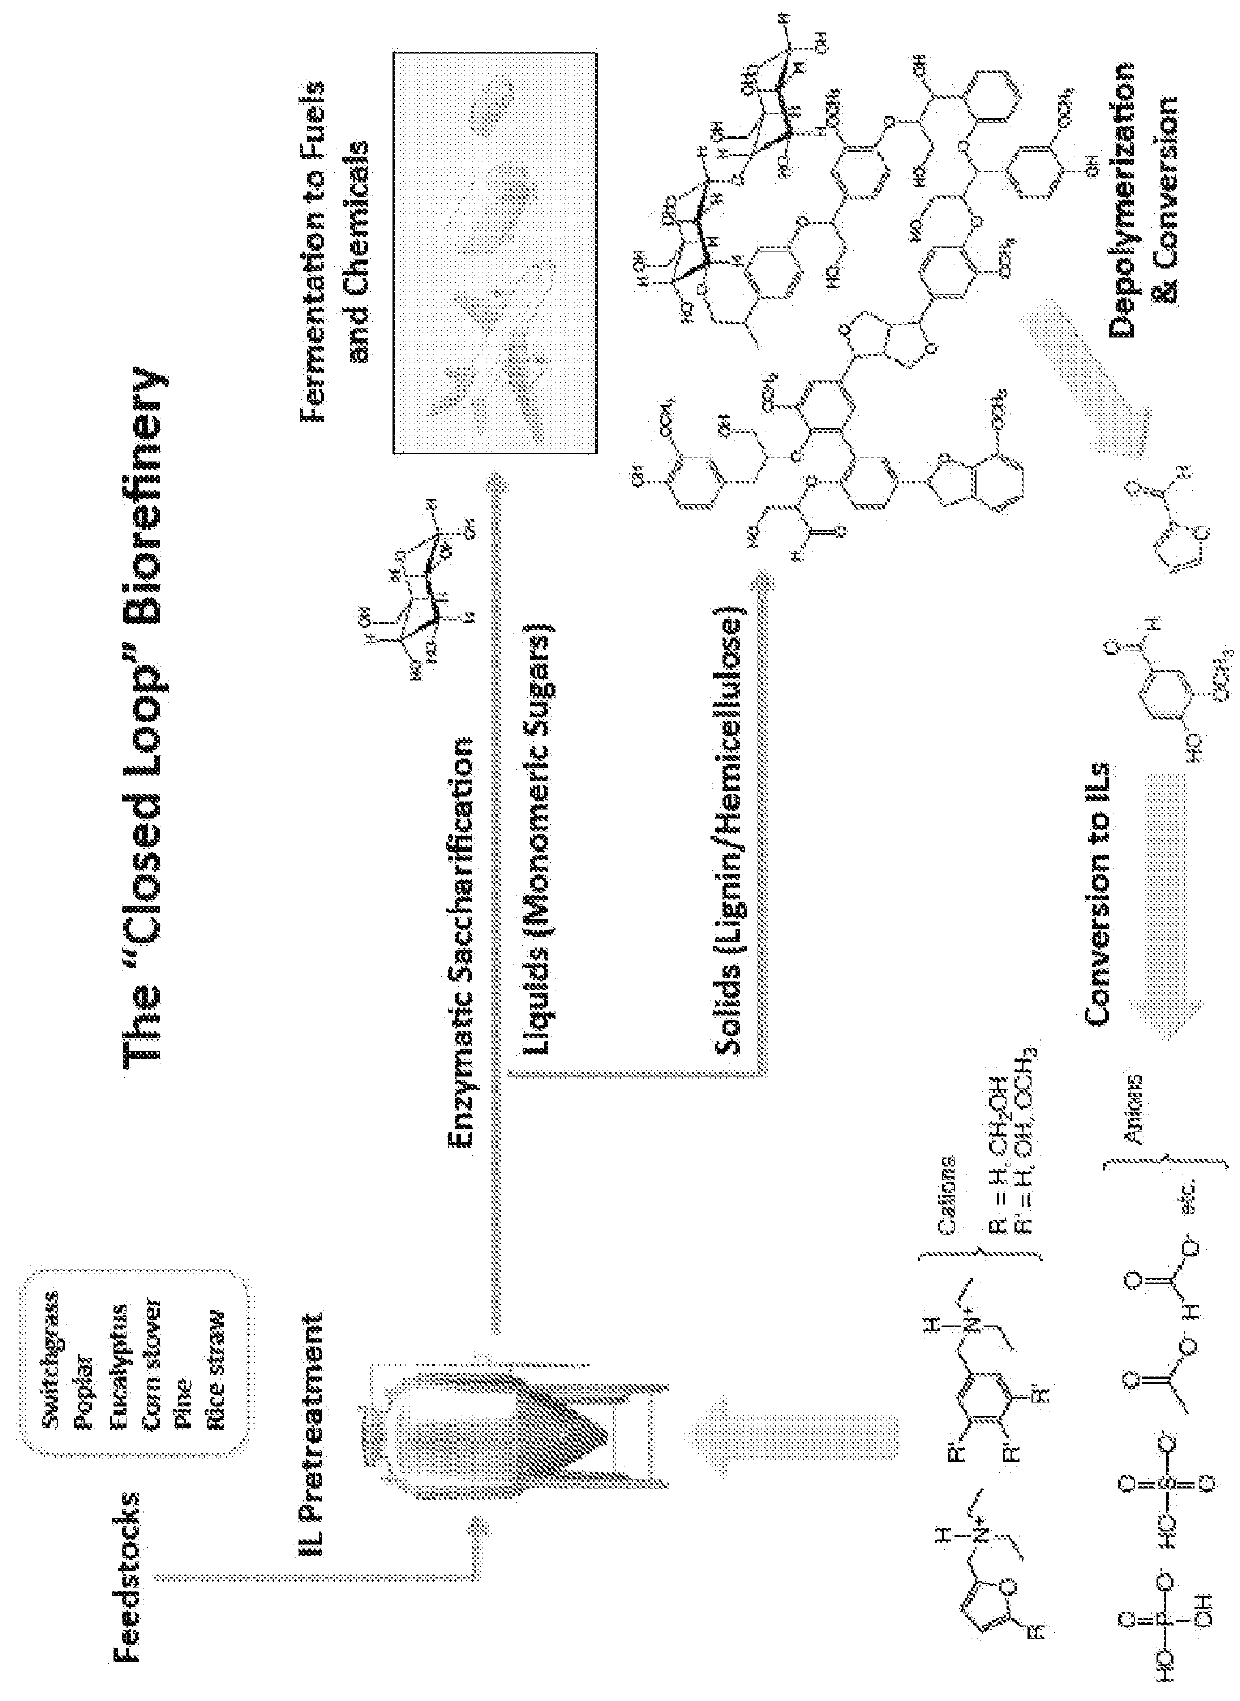 Synthesis of novel ionic liquids from lignin-derived compounds